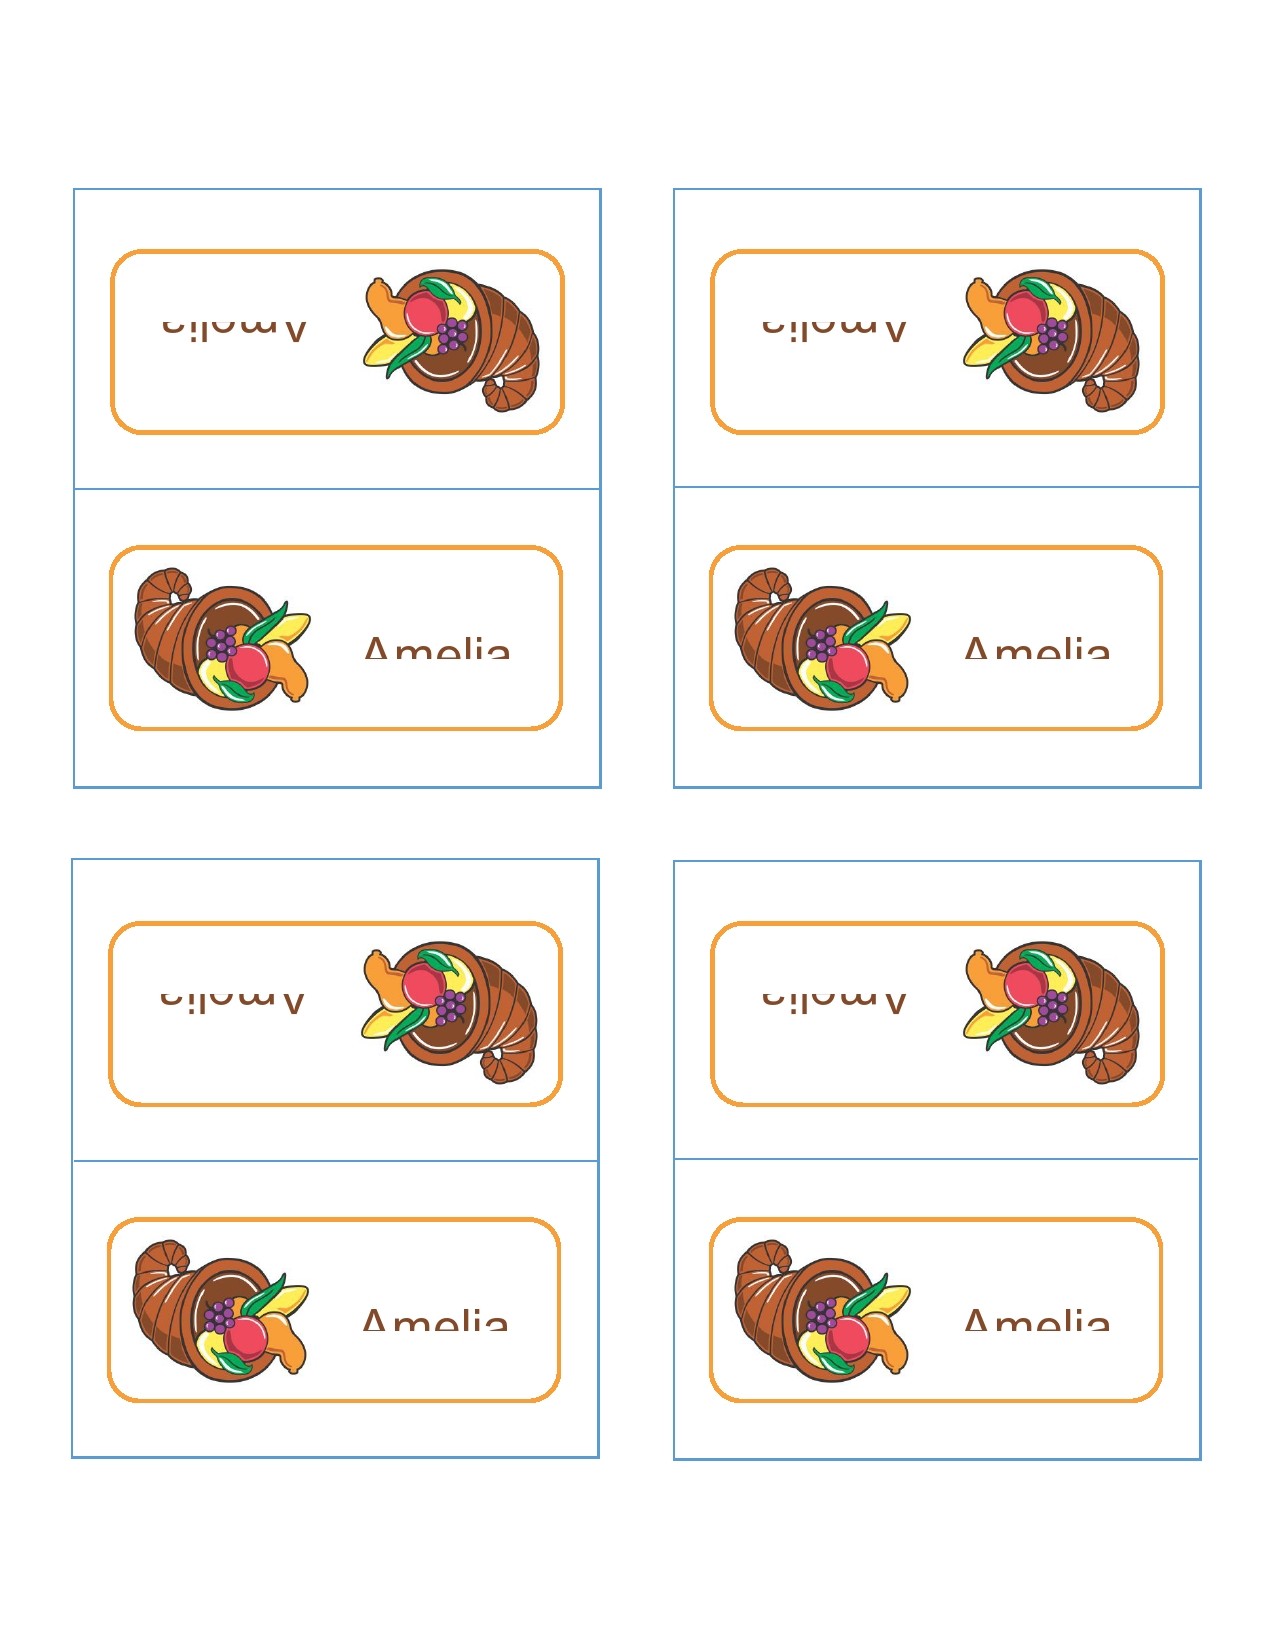 Printable Place Cards